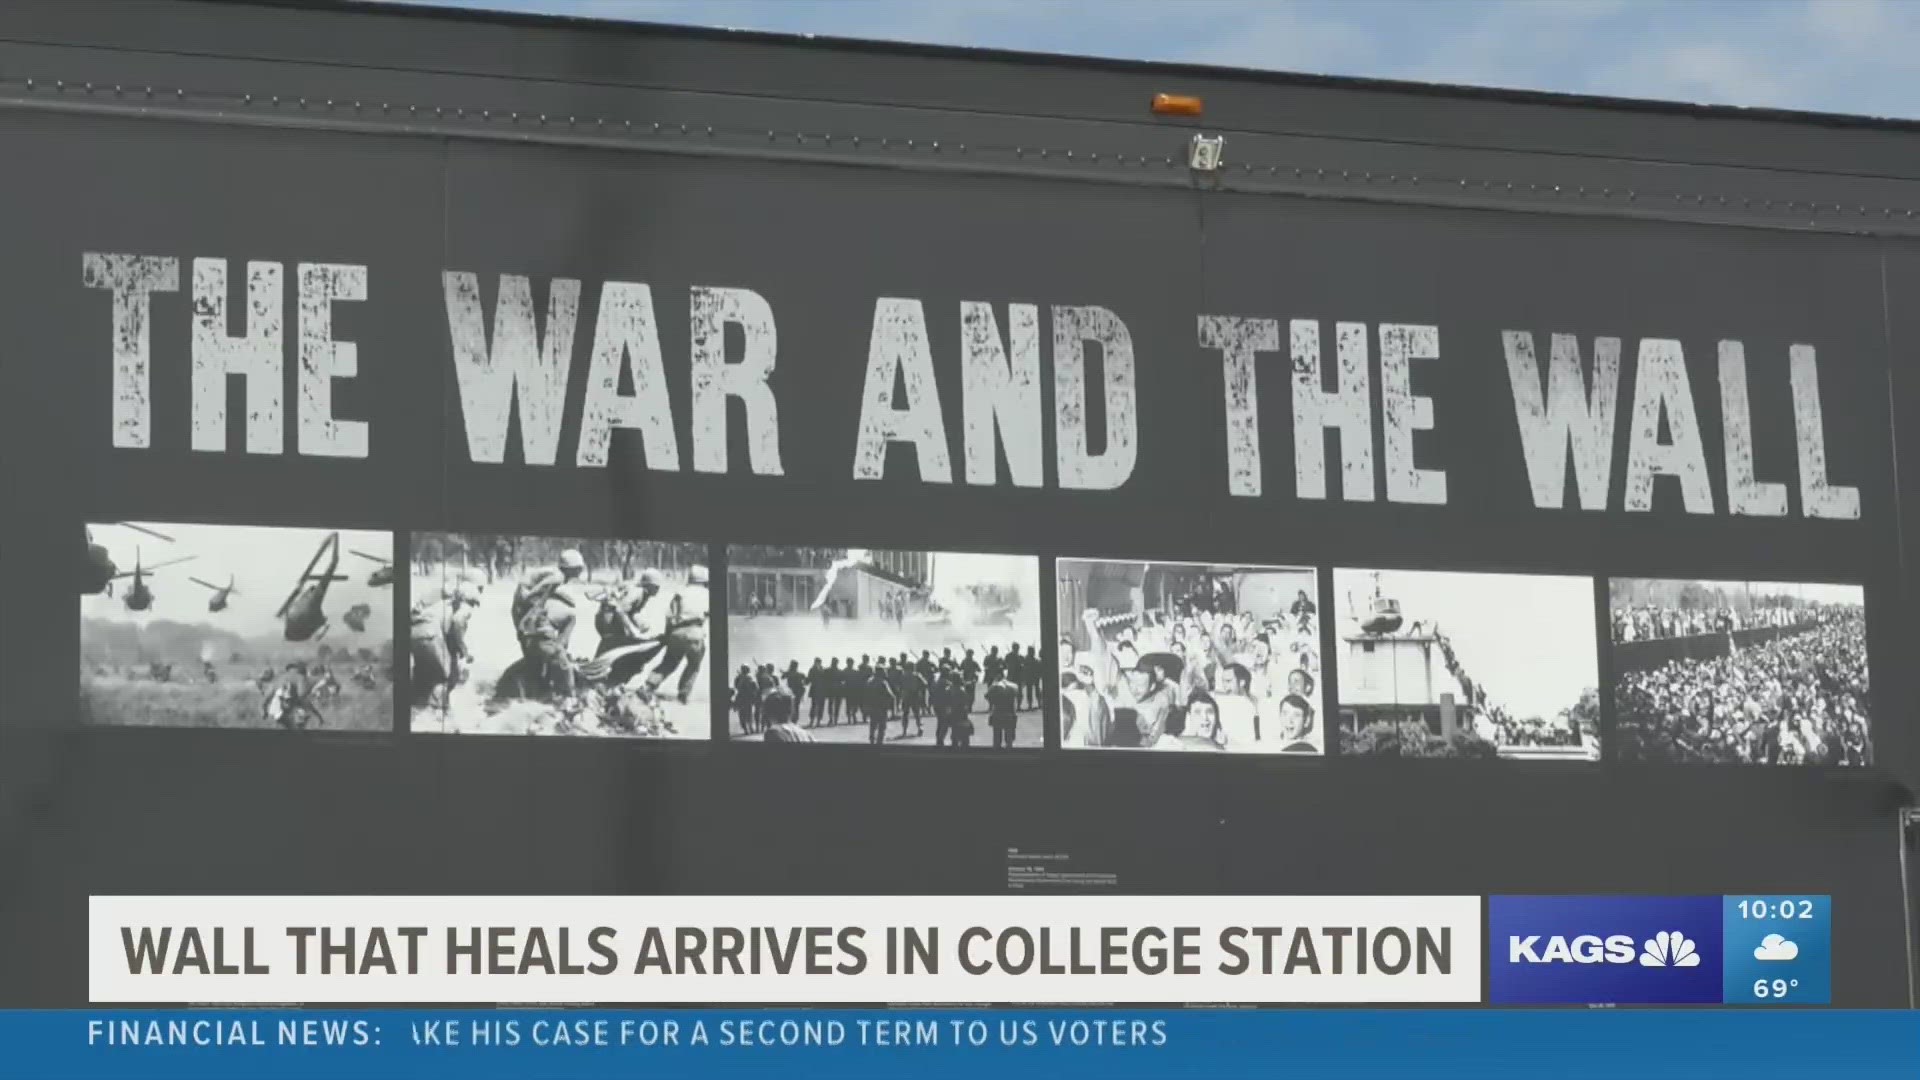 The Wall that Heals display arrives in College Station